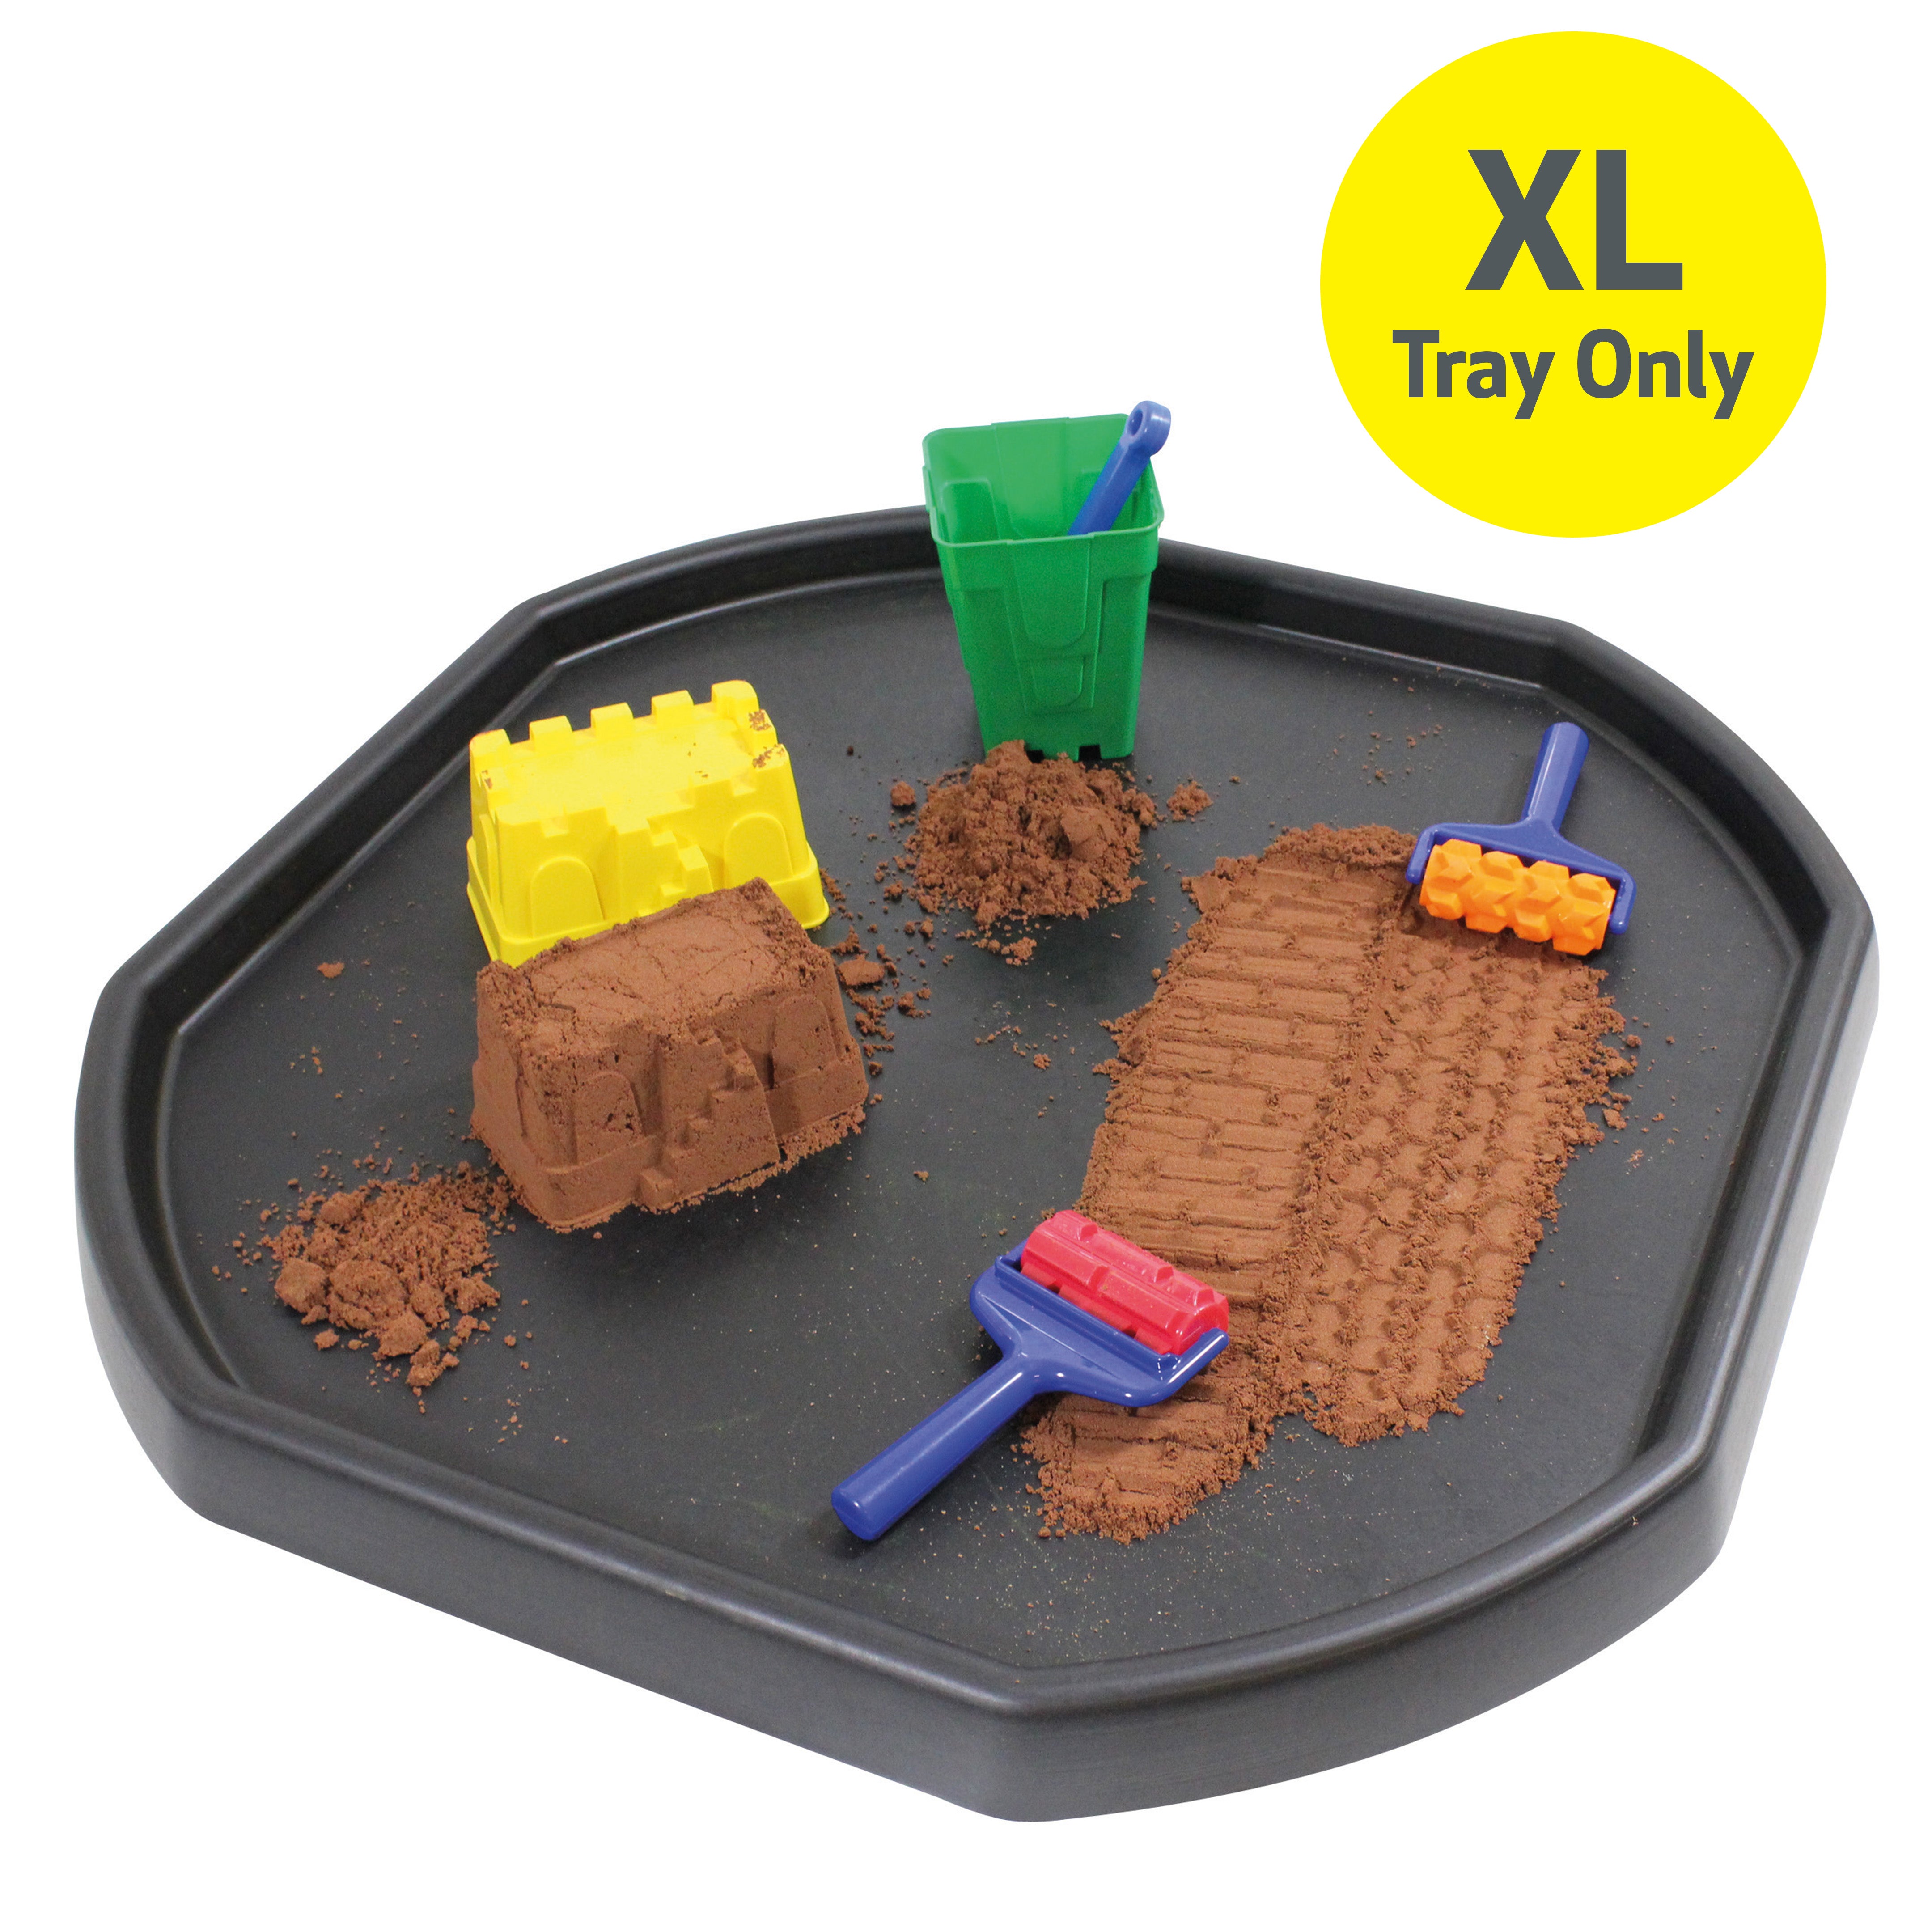 Tuff Tray with Stand - Black